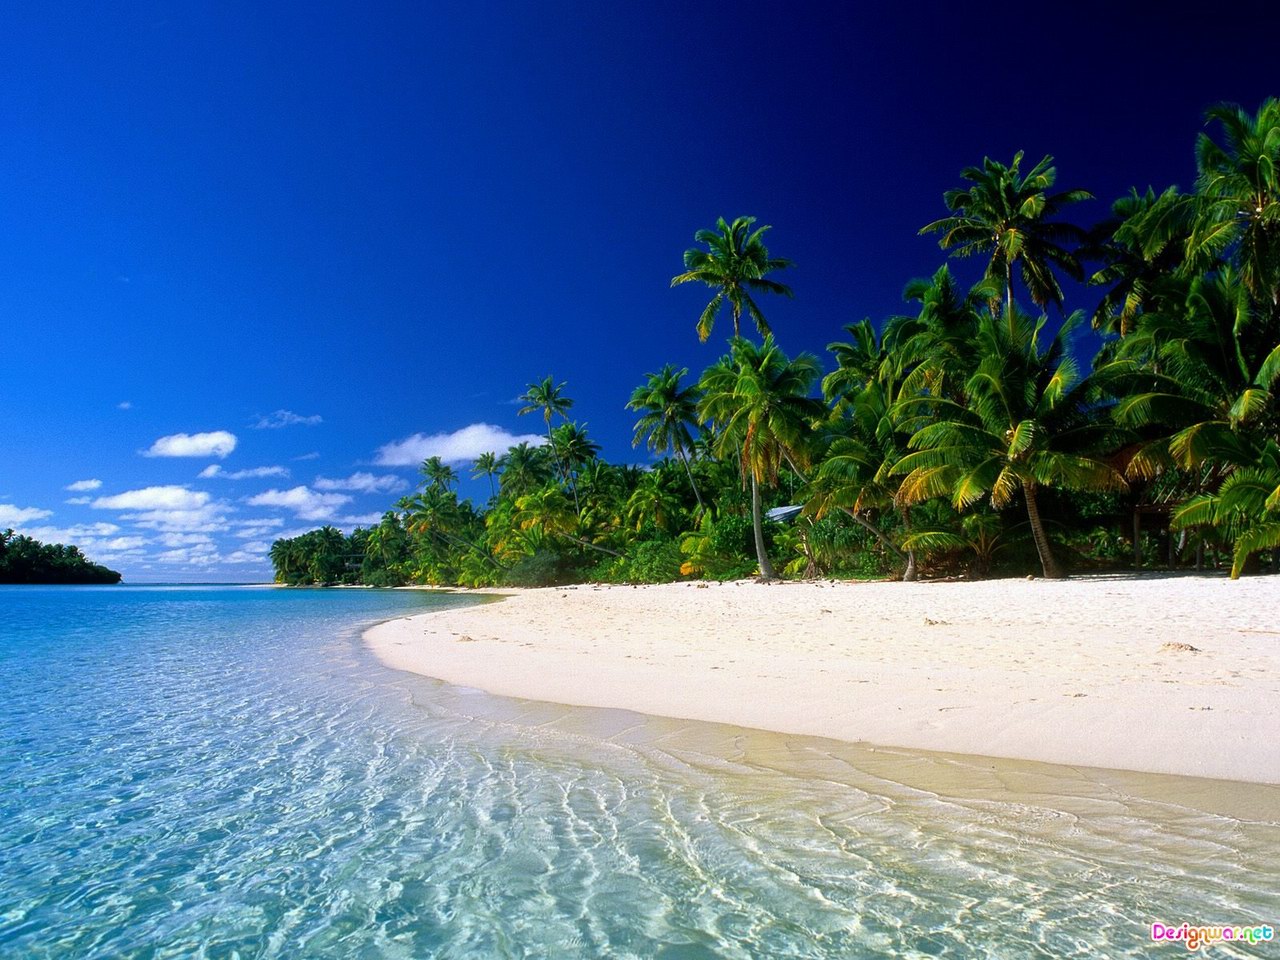  Get Download Tropical Beach hd Wallpaper and make this wallpaper 1280x960